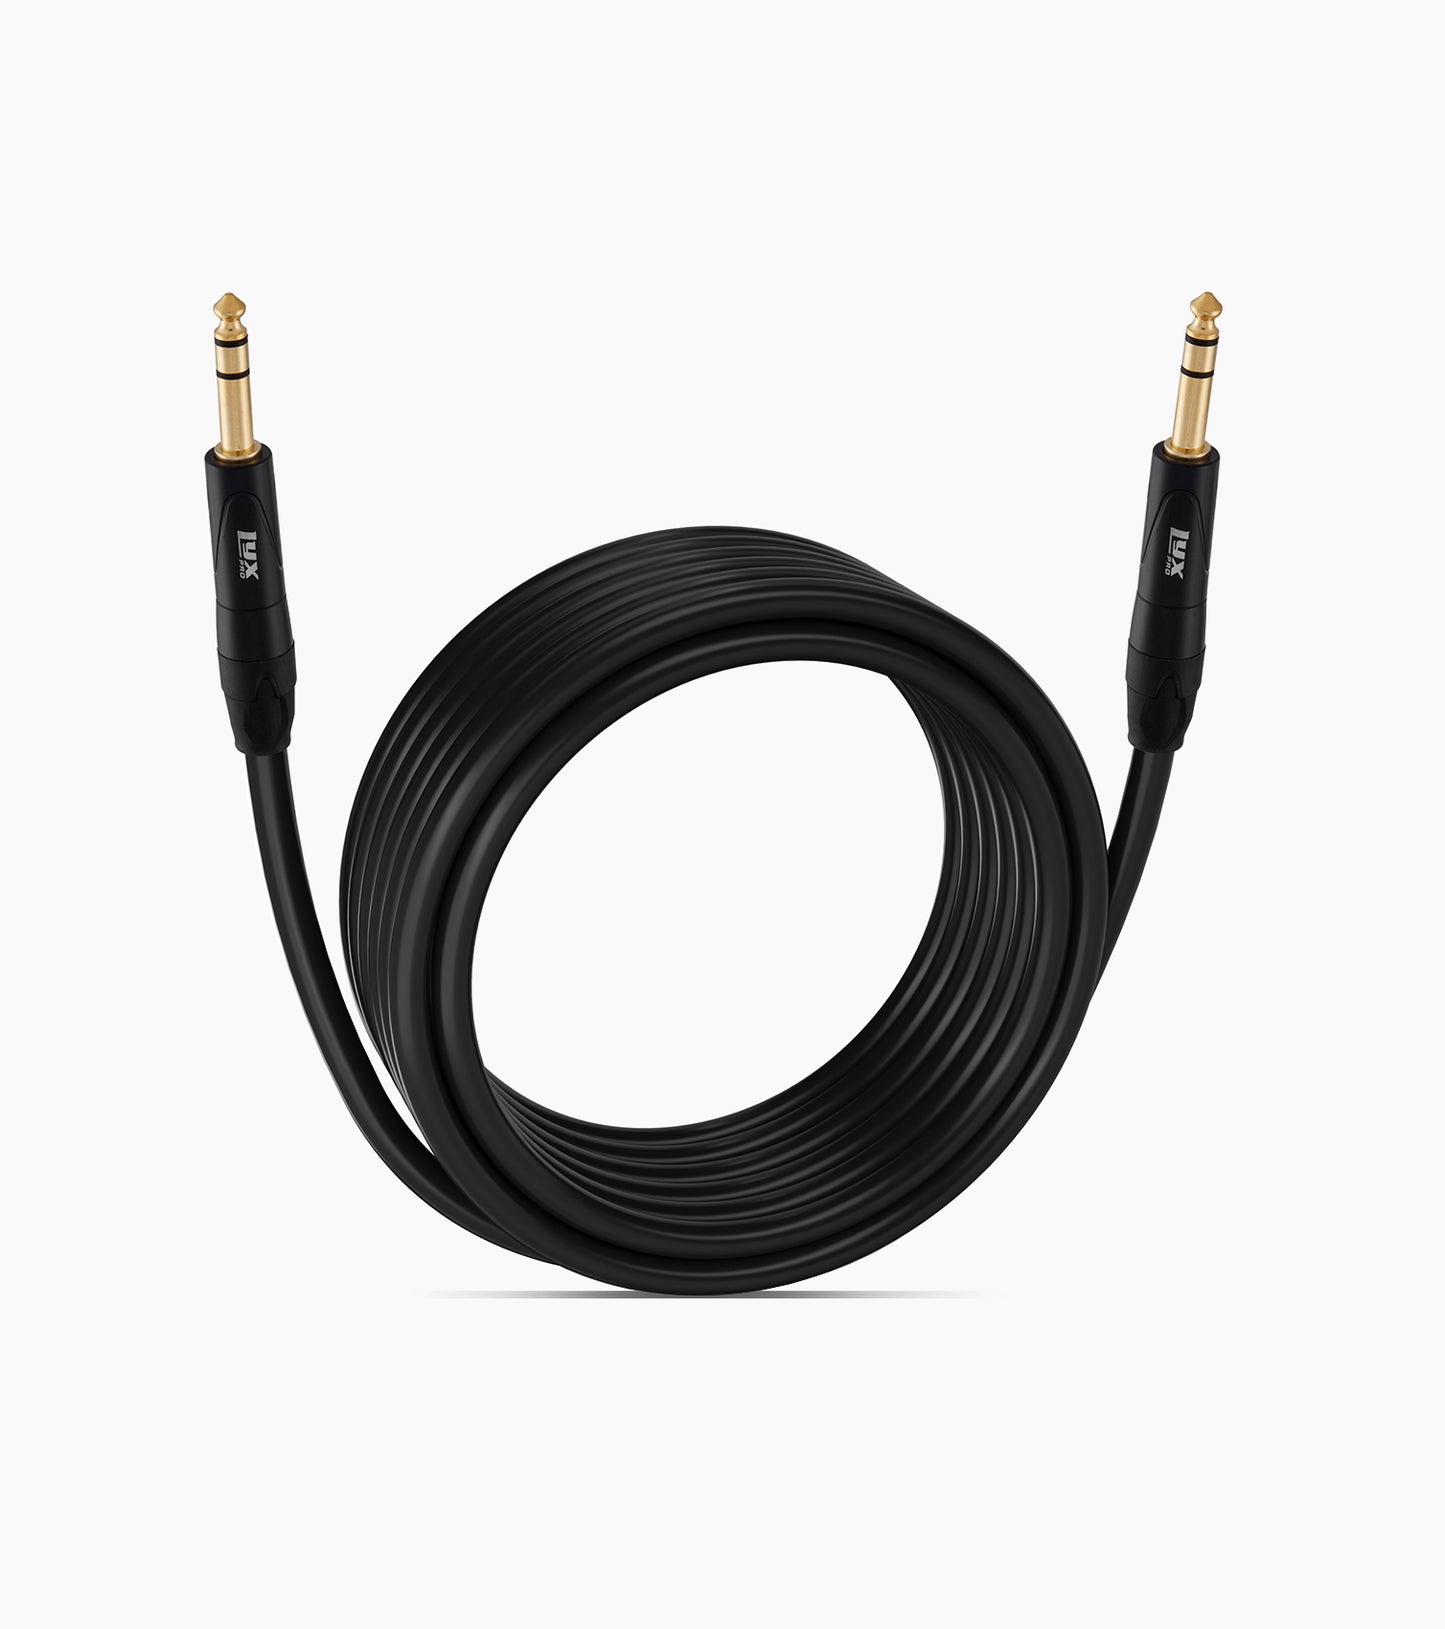 25 ft TRS audio cable